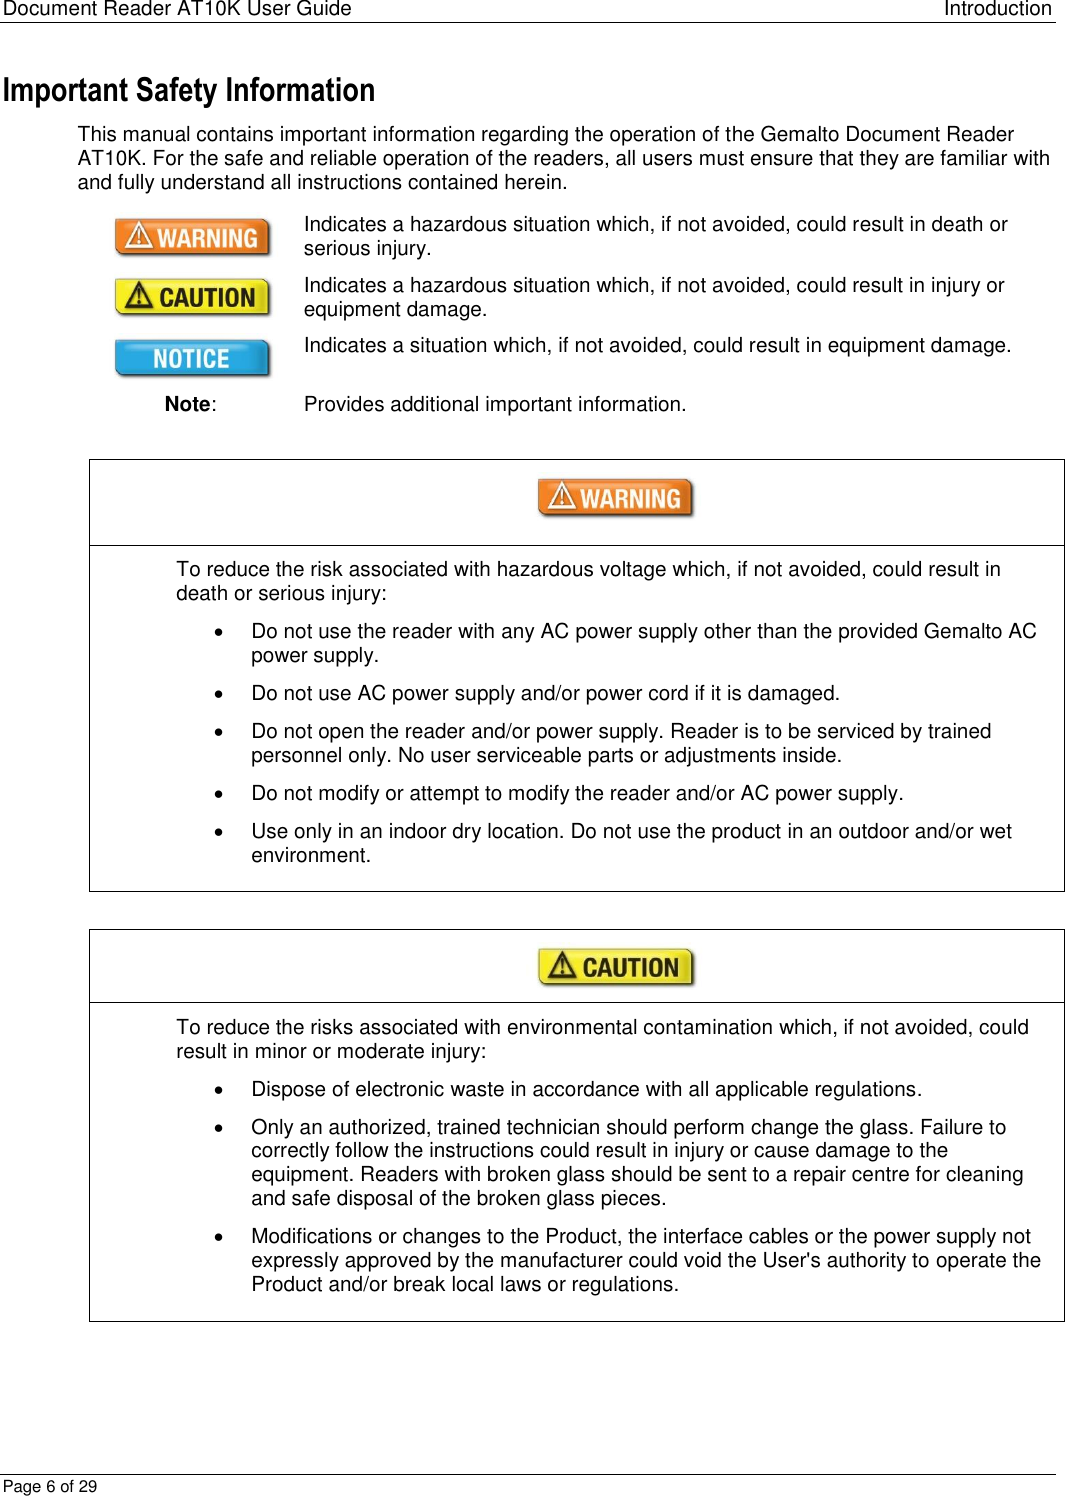 Document Reader AT10K User Guide Introduction Page 6 of 29 Important Safety Information This manual contains important information regarding the operation of the Gemalto Document Reader AT10K. For the safe and reliable operation of the readers, all users must ensure that they are familiar with and fully understand all instructions contained herein.  Indicates a hazardous situation which, if not avoided, could result in death or serious injury.  Indicates a hazardous situation which, if not avoided, could result in injury or equipment damage.  Indicates a situation which, if not avoided, could result in equipment damage. Note: Provides additional important information.   To reduce the risk associated with hazardous voltage which, if not avoided, could result in death or serious injury:   Do not use the reader with any AC power supply other than the provided Gemalto AC power supply.   Do not use AC power supply and/or power cord if it is damaged.   Do not open the reader and/or power supply. Reader is to be serviced by trained personnel only. No user serviceable parts or adjustments inside.   Do not modify or attempt to modify the reader and/or AC power supply.   Use only in an indoor dry location. Do not use the product in an outdoor and/or wet environment.   To reduce the risks associated with environmental contamination which, if not avoided, could result in minor or moderate injury:   Dispose of electronic waste in accordance with all applicable regulations.   Only an authorized, trained technician should perform change the glass. Failure to correctly follow the instructions could result in injury or cause damage to the equipment. Readers with broken glass should be sent to a repair centre for cleaning and safe disposal of the broken glass pieces.   Modifications or changes to the Product, the interface cables or the power supply not expressly approved by the manufacturer could void the User&apos;s authority to operate the Product and/or break local laws or regulations.  